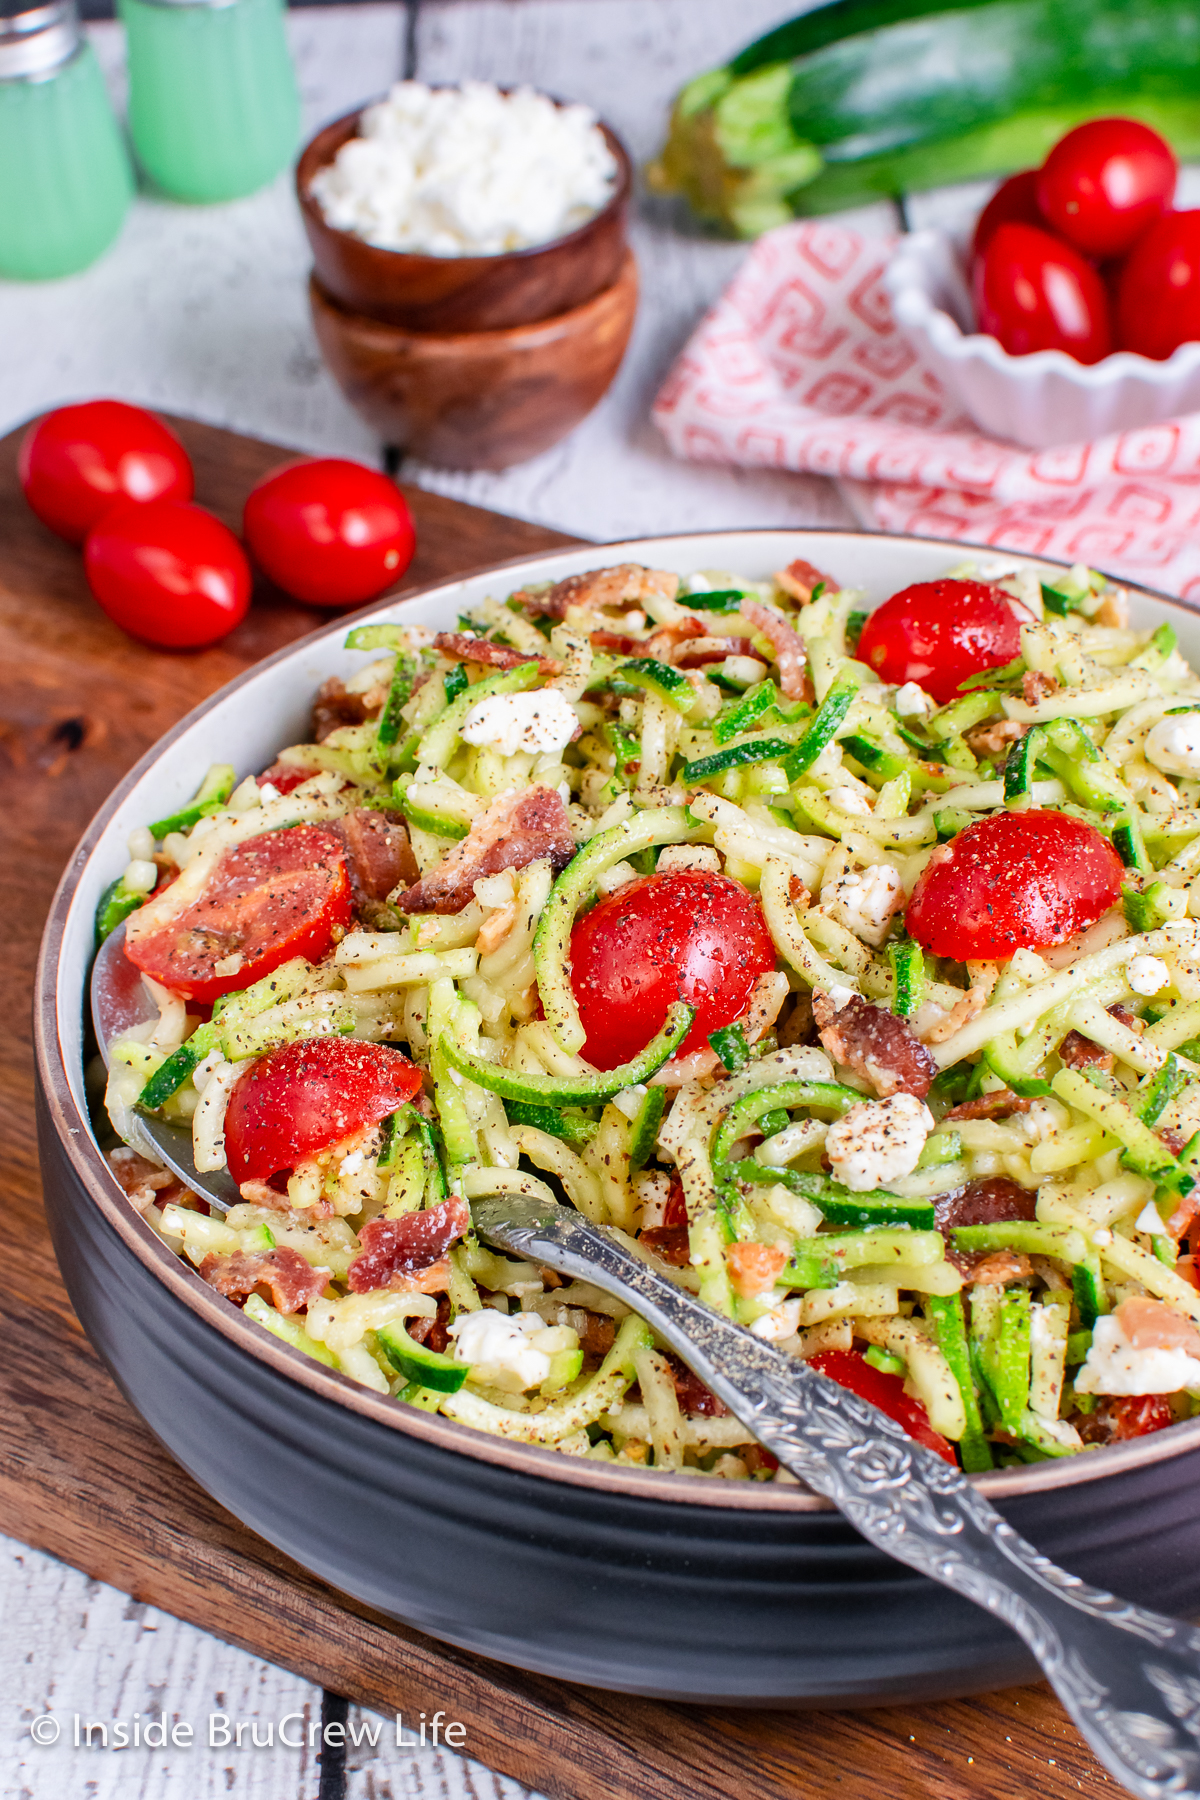 A large bowl of zucchini salad with tomatoes and feta.